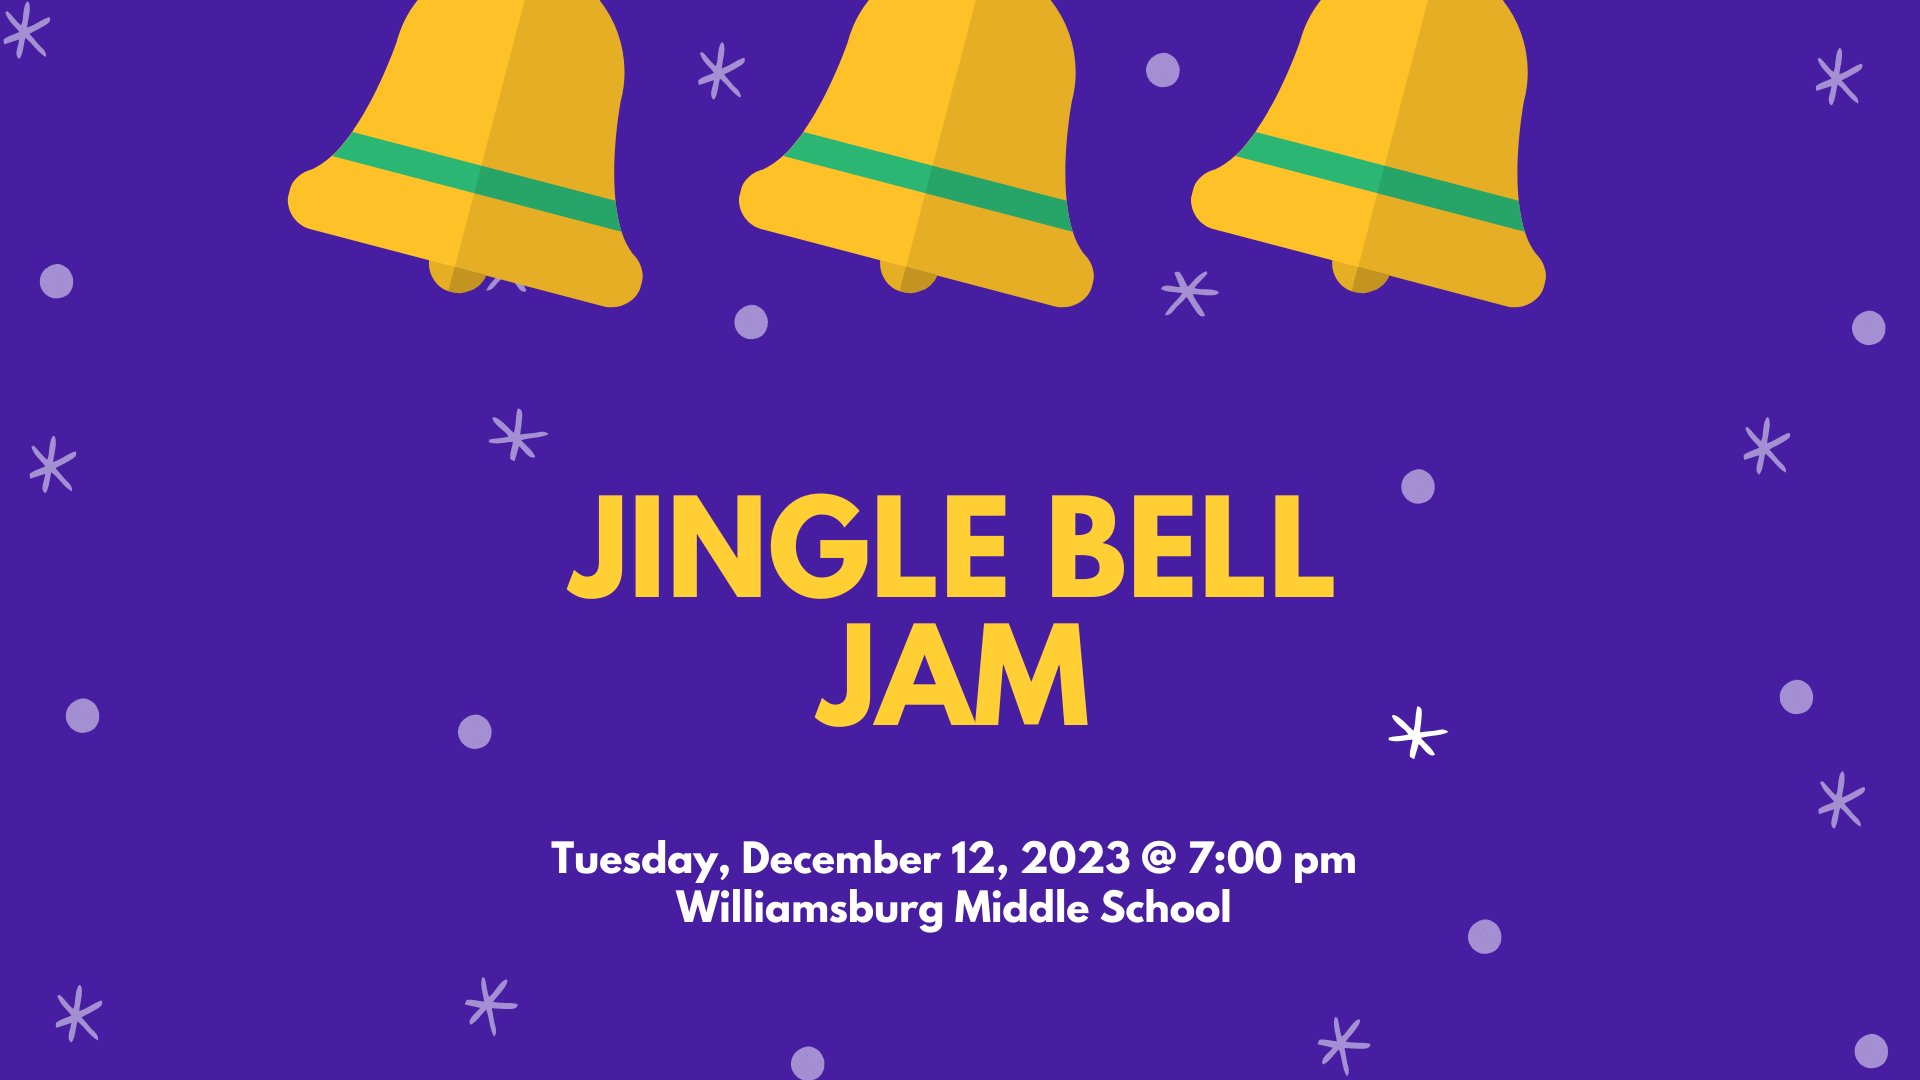 Jingle Bell Jam Tuesday December 12 at 7:00 pm Williamsburg Middle School